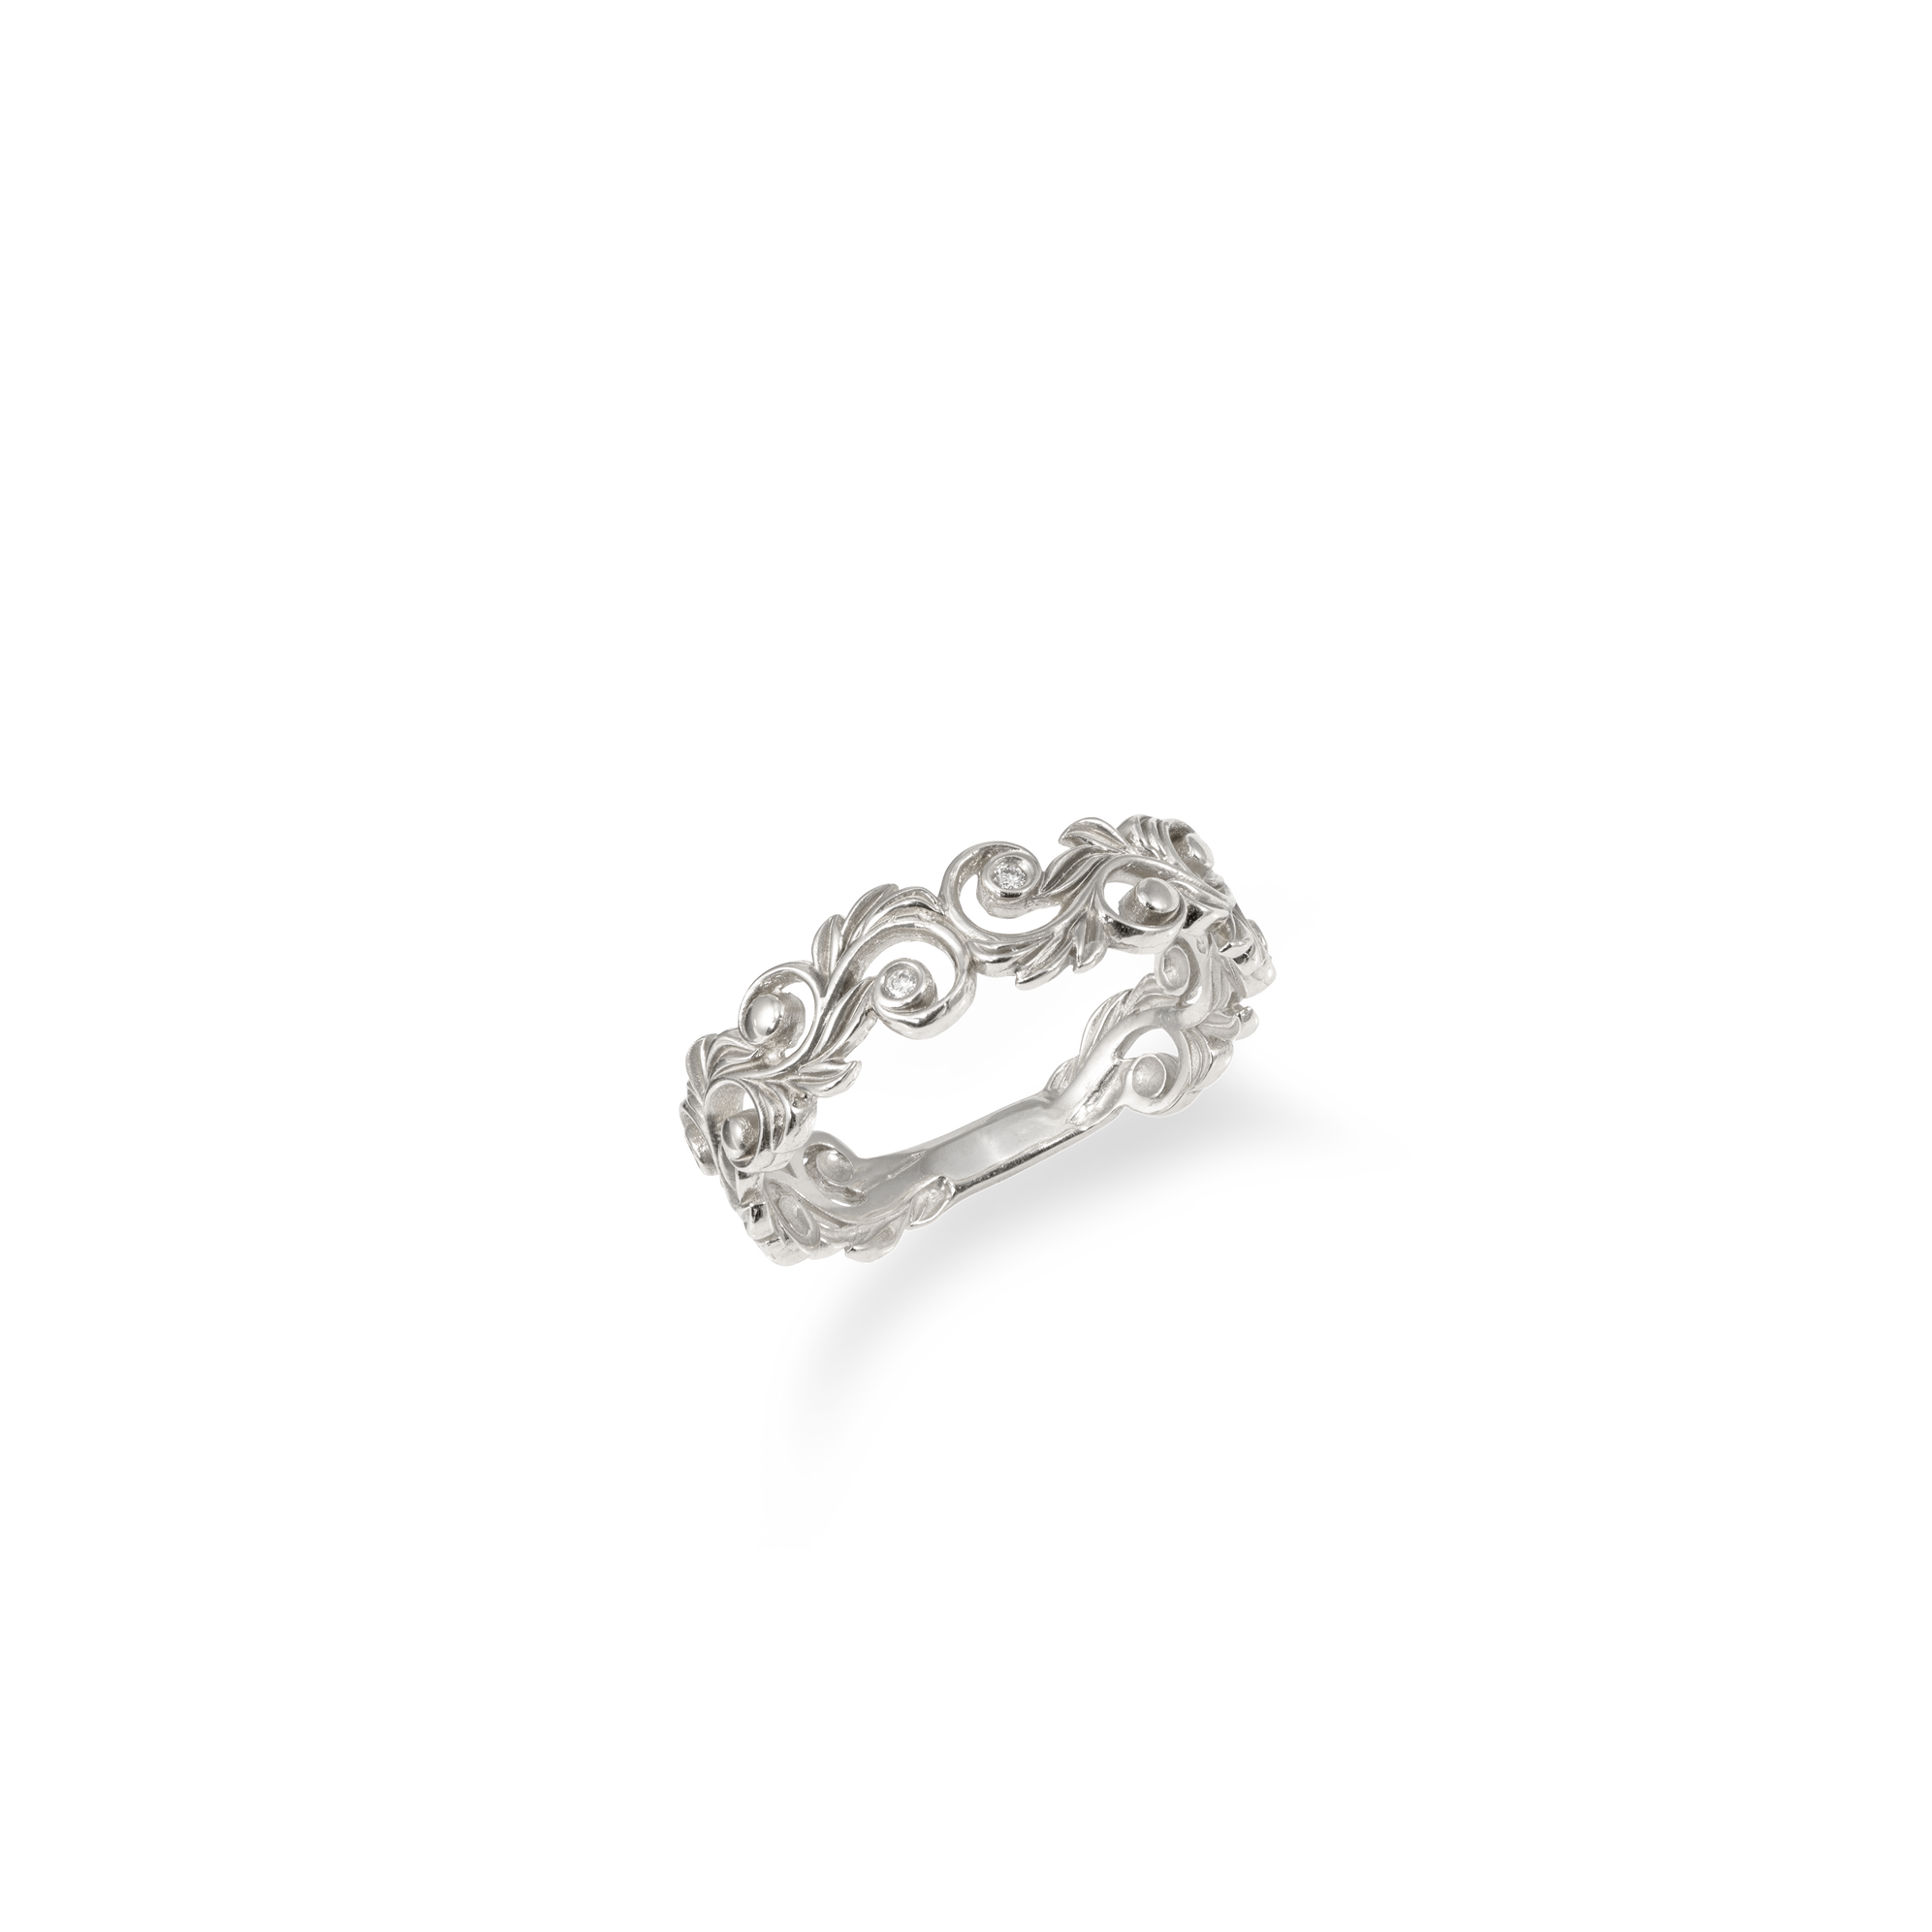 Living Heirloom Ring in White Gold with Diamonds - 6mm